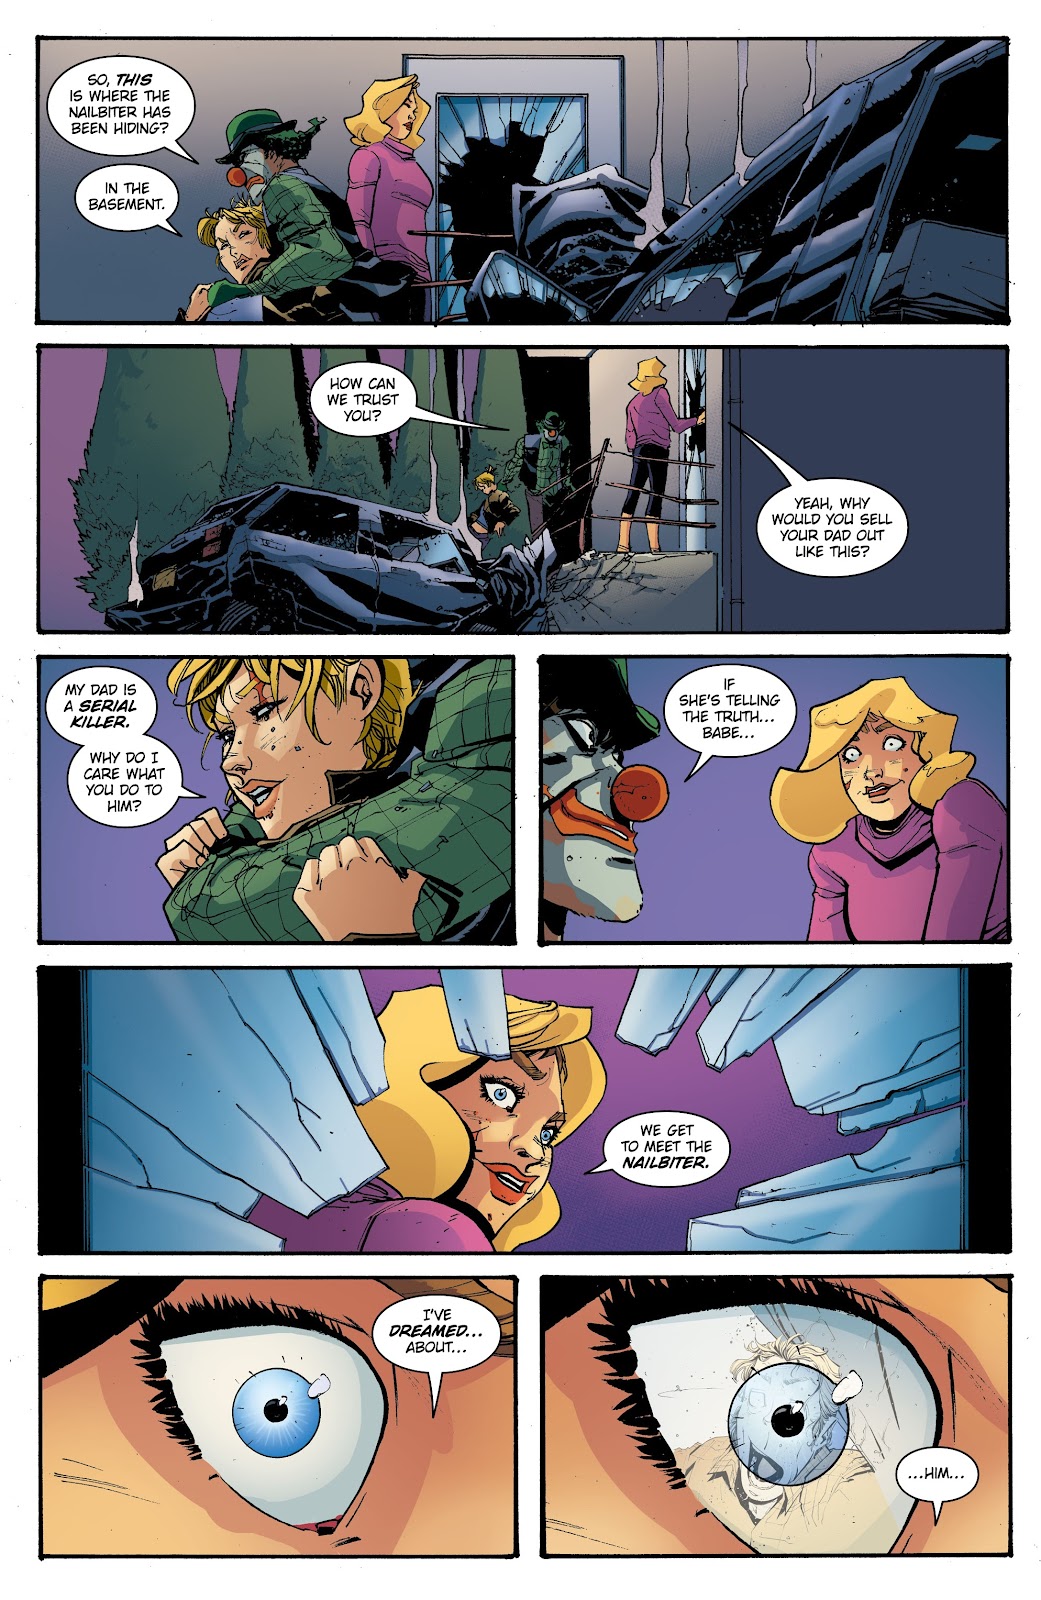 Nailbiter Returns issue 3 - Page 11